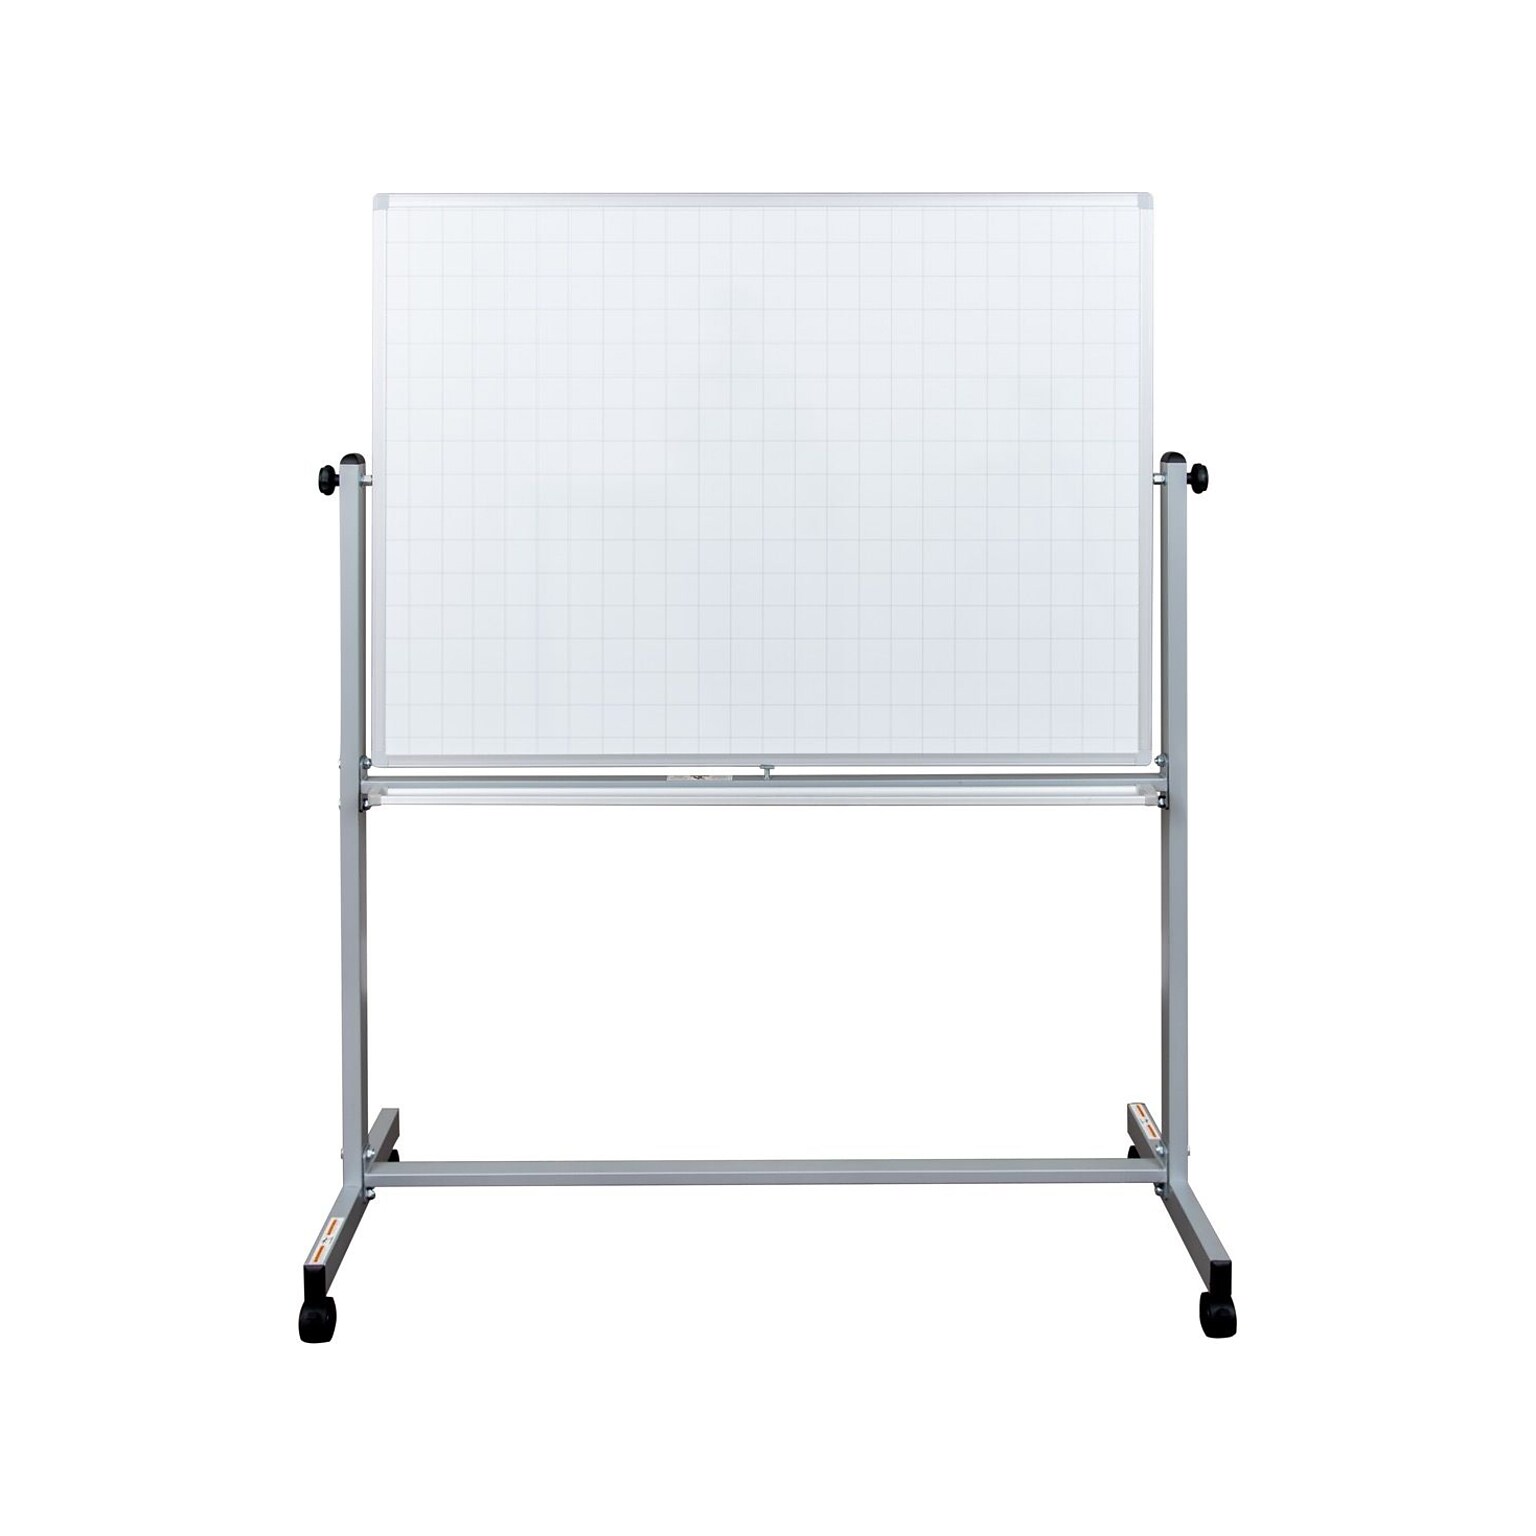 Luxor Dry-Erase Mobile Combination Ghost Grid/Whiteboard, Aluminum Frame, 36 x 48 (MB4836LB)